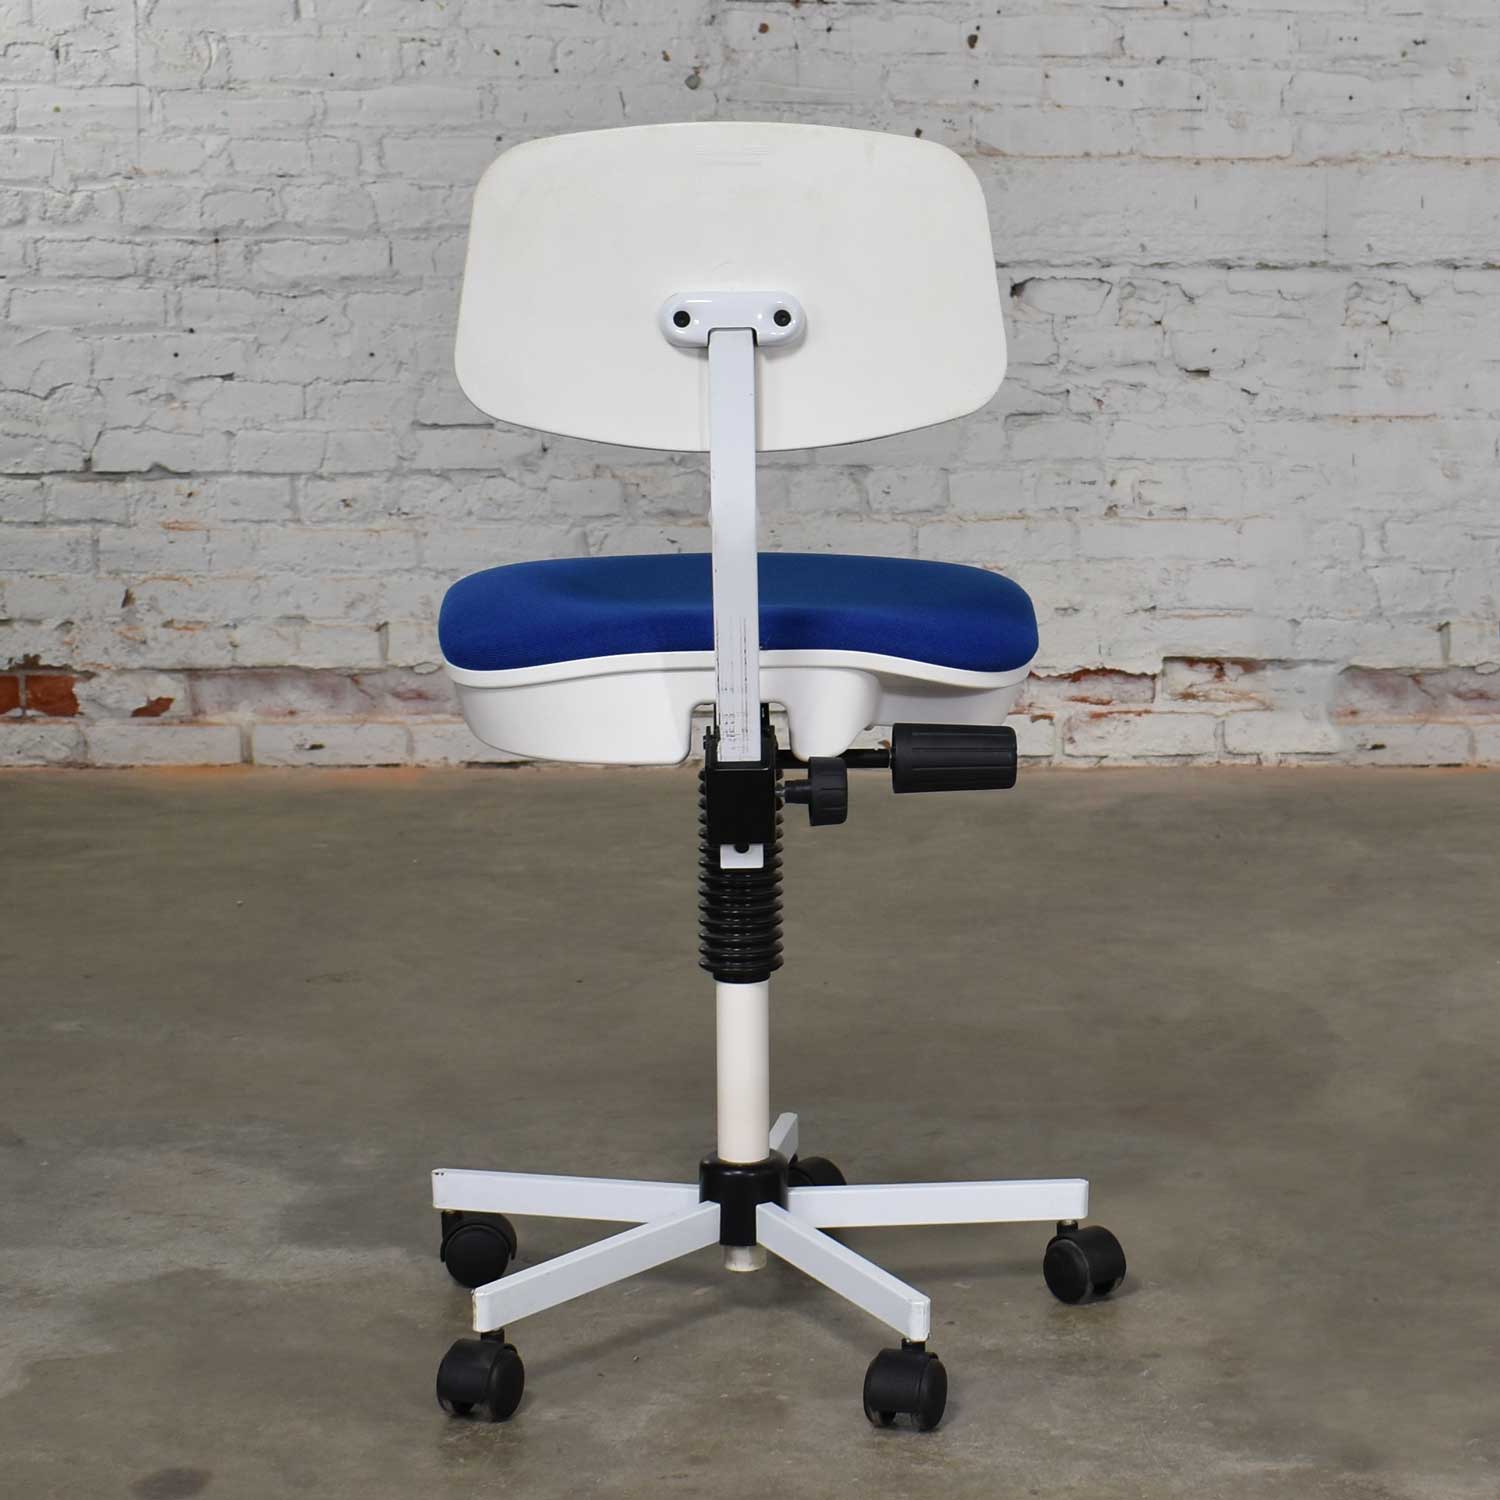 Rabami Made in Denmark Task Chair Blue & White Attributed to Kevi by Jorgen Rasmussen